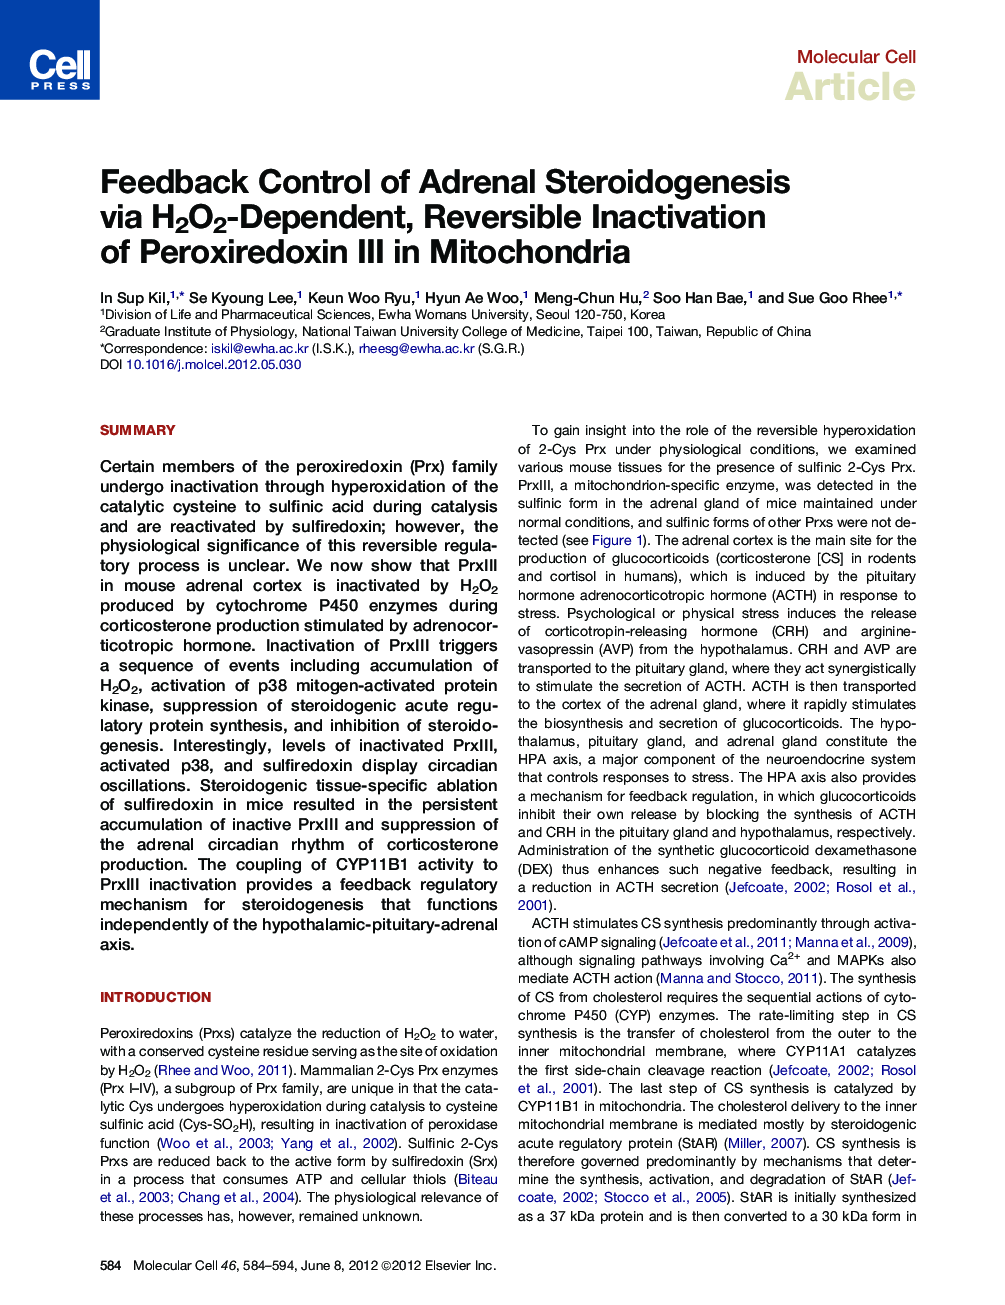 Feedback Control of Adrenal Steroidogenesis via H2O2-Dependent, Reversible Inactivation of Peroxiredoxin III in Mitochondria